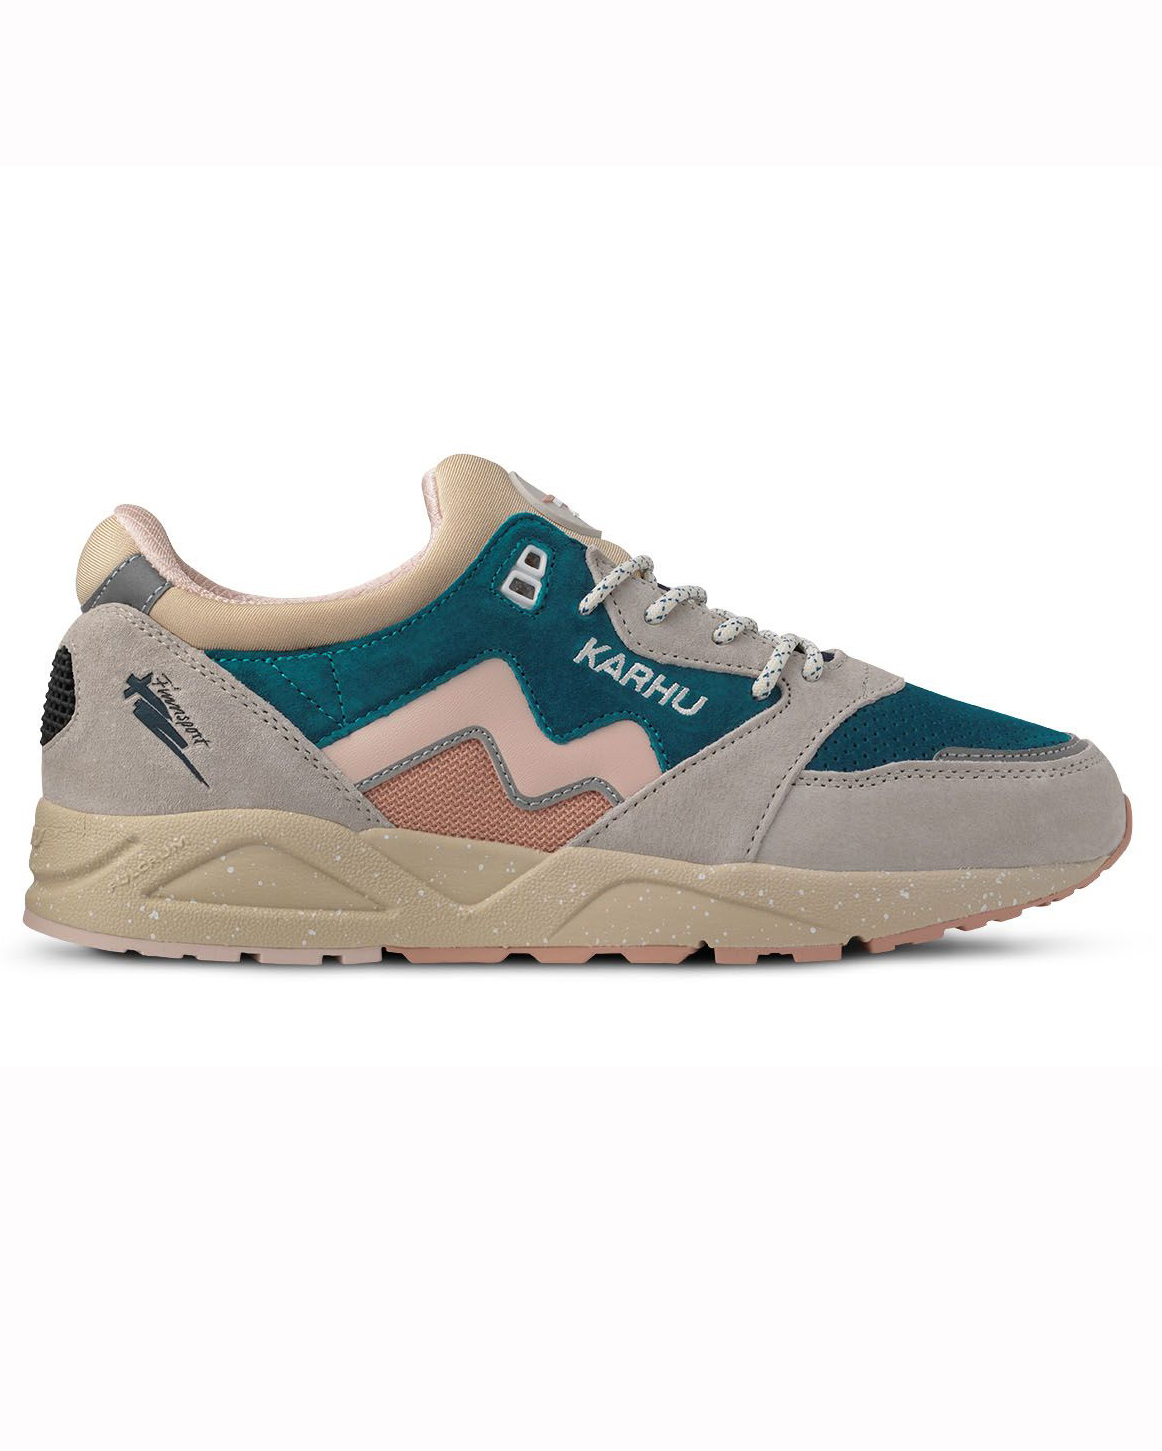 Sneakers Aria 95 - Silver Lining/ Peach Whip